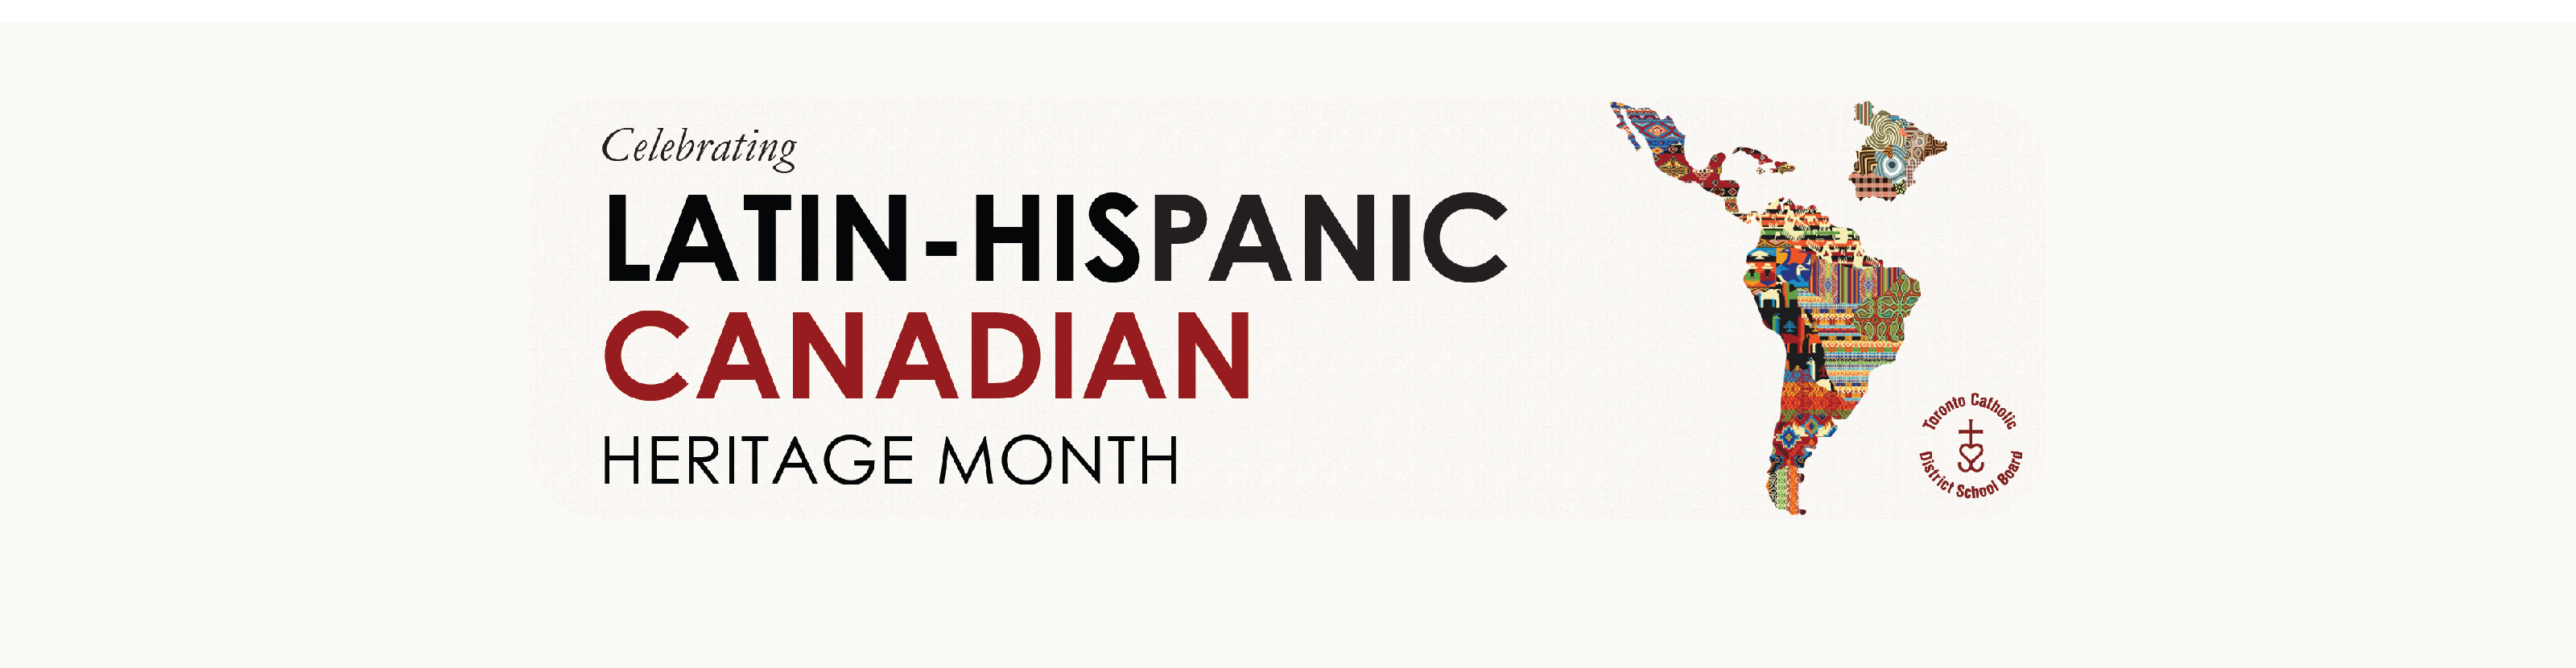 October is Latin-Hispanic Canadian Heritage Month. The poster includes a map of Latin America, along with the Toronto Catholic District School Board logo.